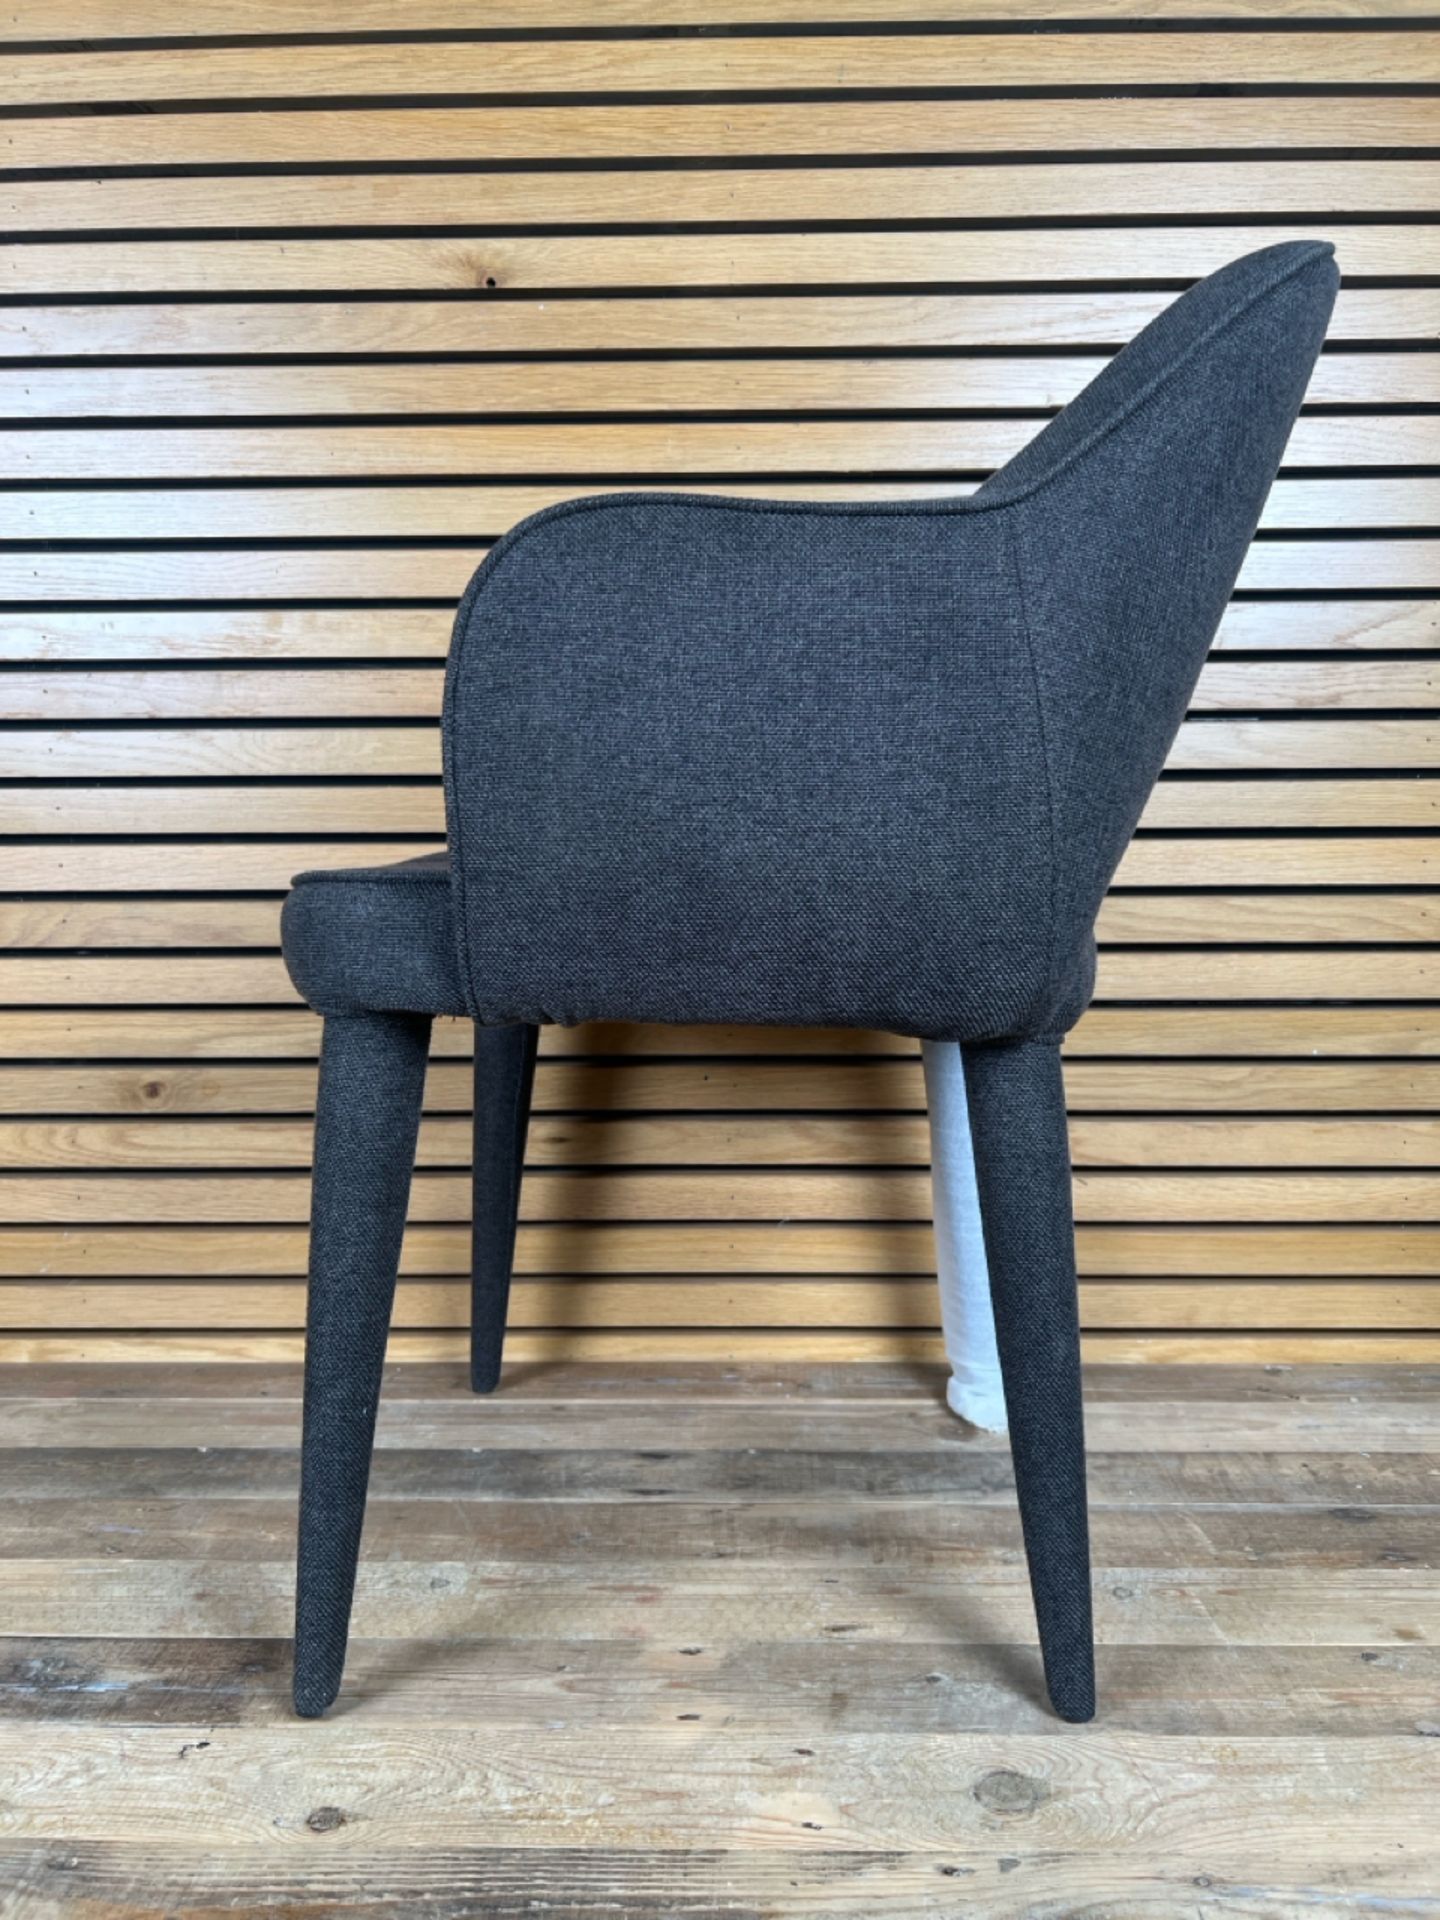 Pols Potten Holy Padded Armchair Textile Grey - Image 2 of 5